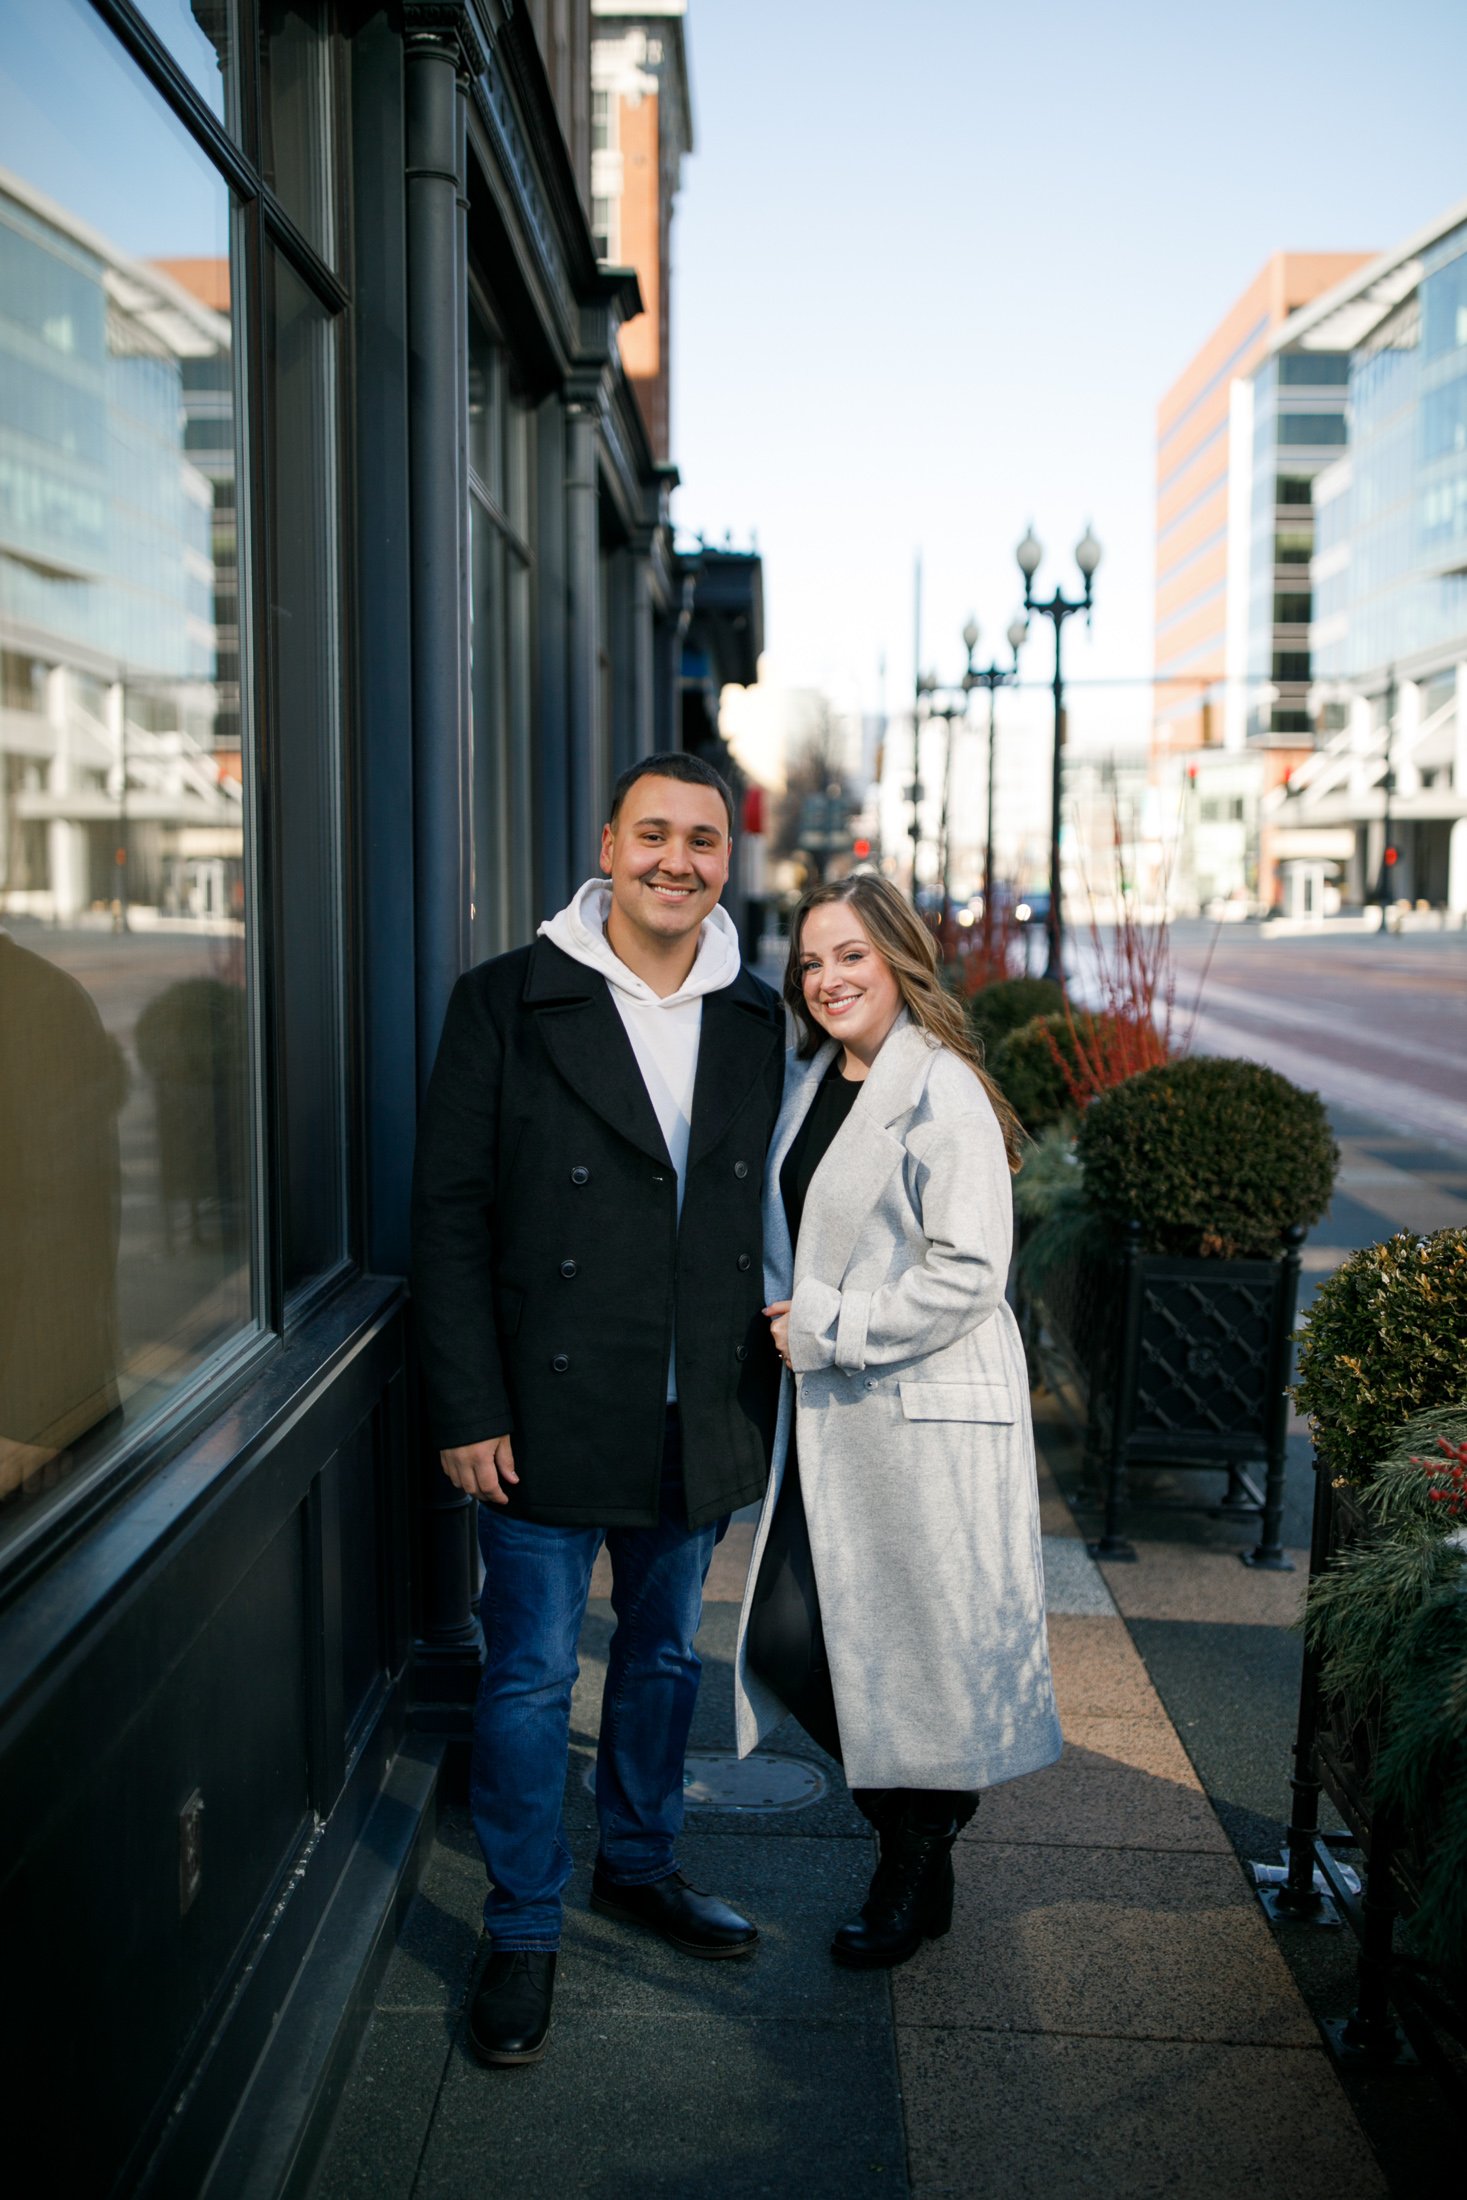 Danielle and Anthony - Grand Rapids Engagement Session - Grand Rapids Wedding Photographer - West Michigan Wedding Photographer Jessica Darling - J Darling Photo_030.jpg